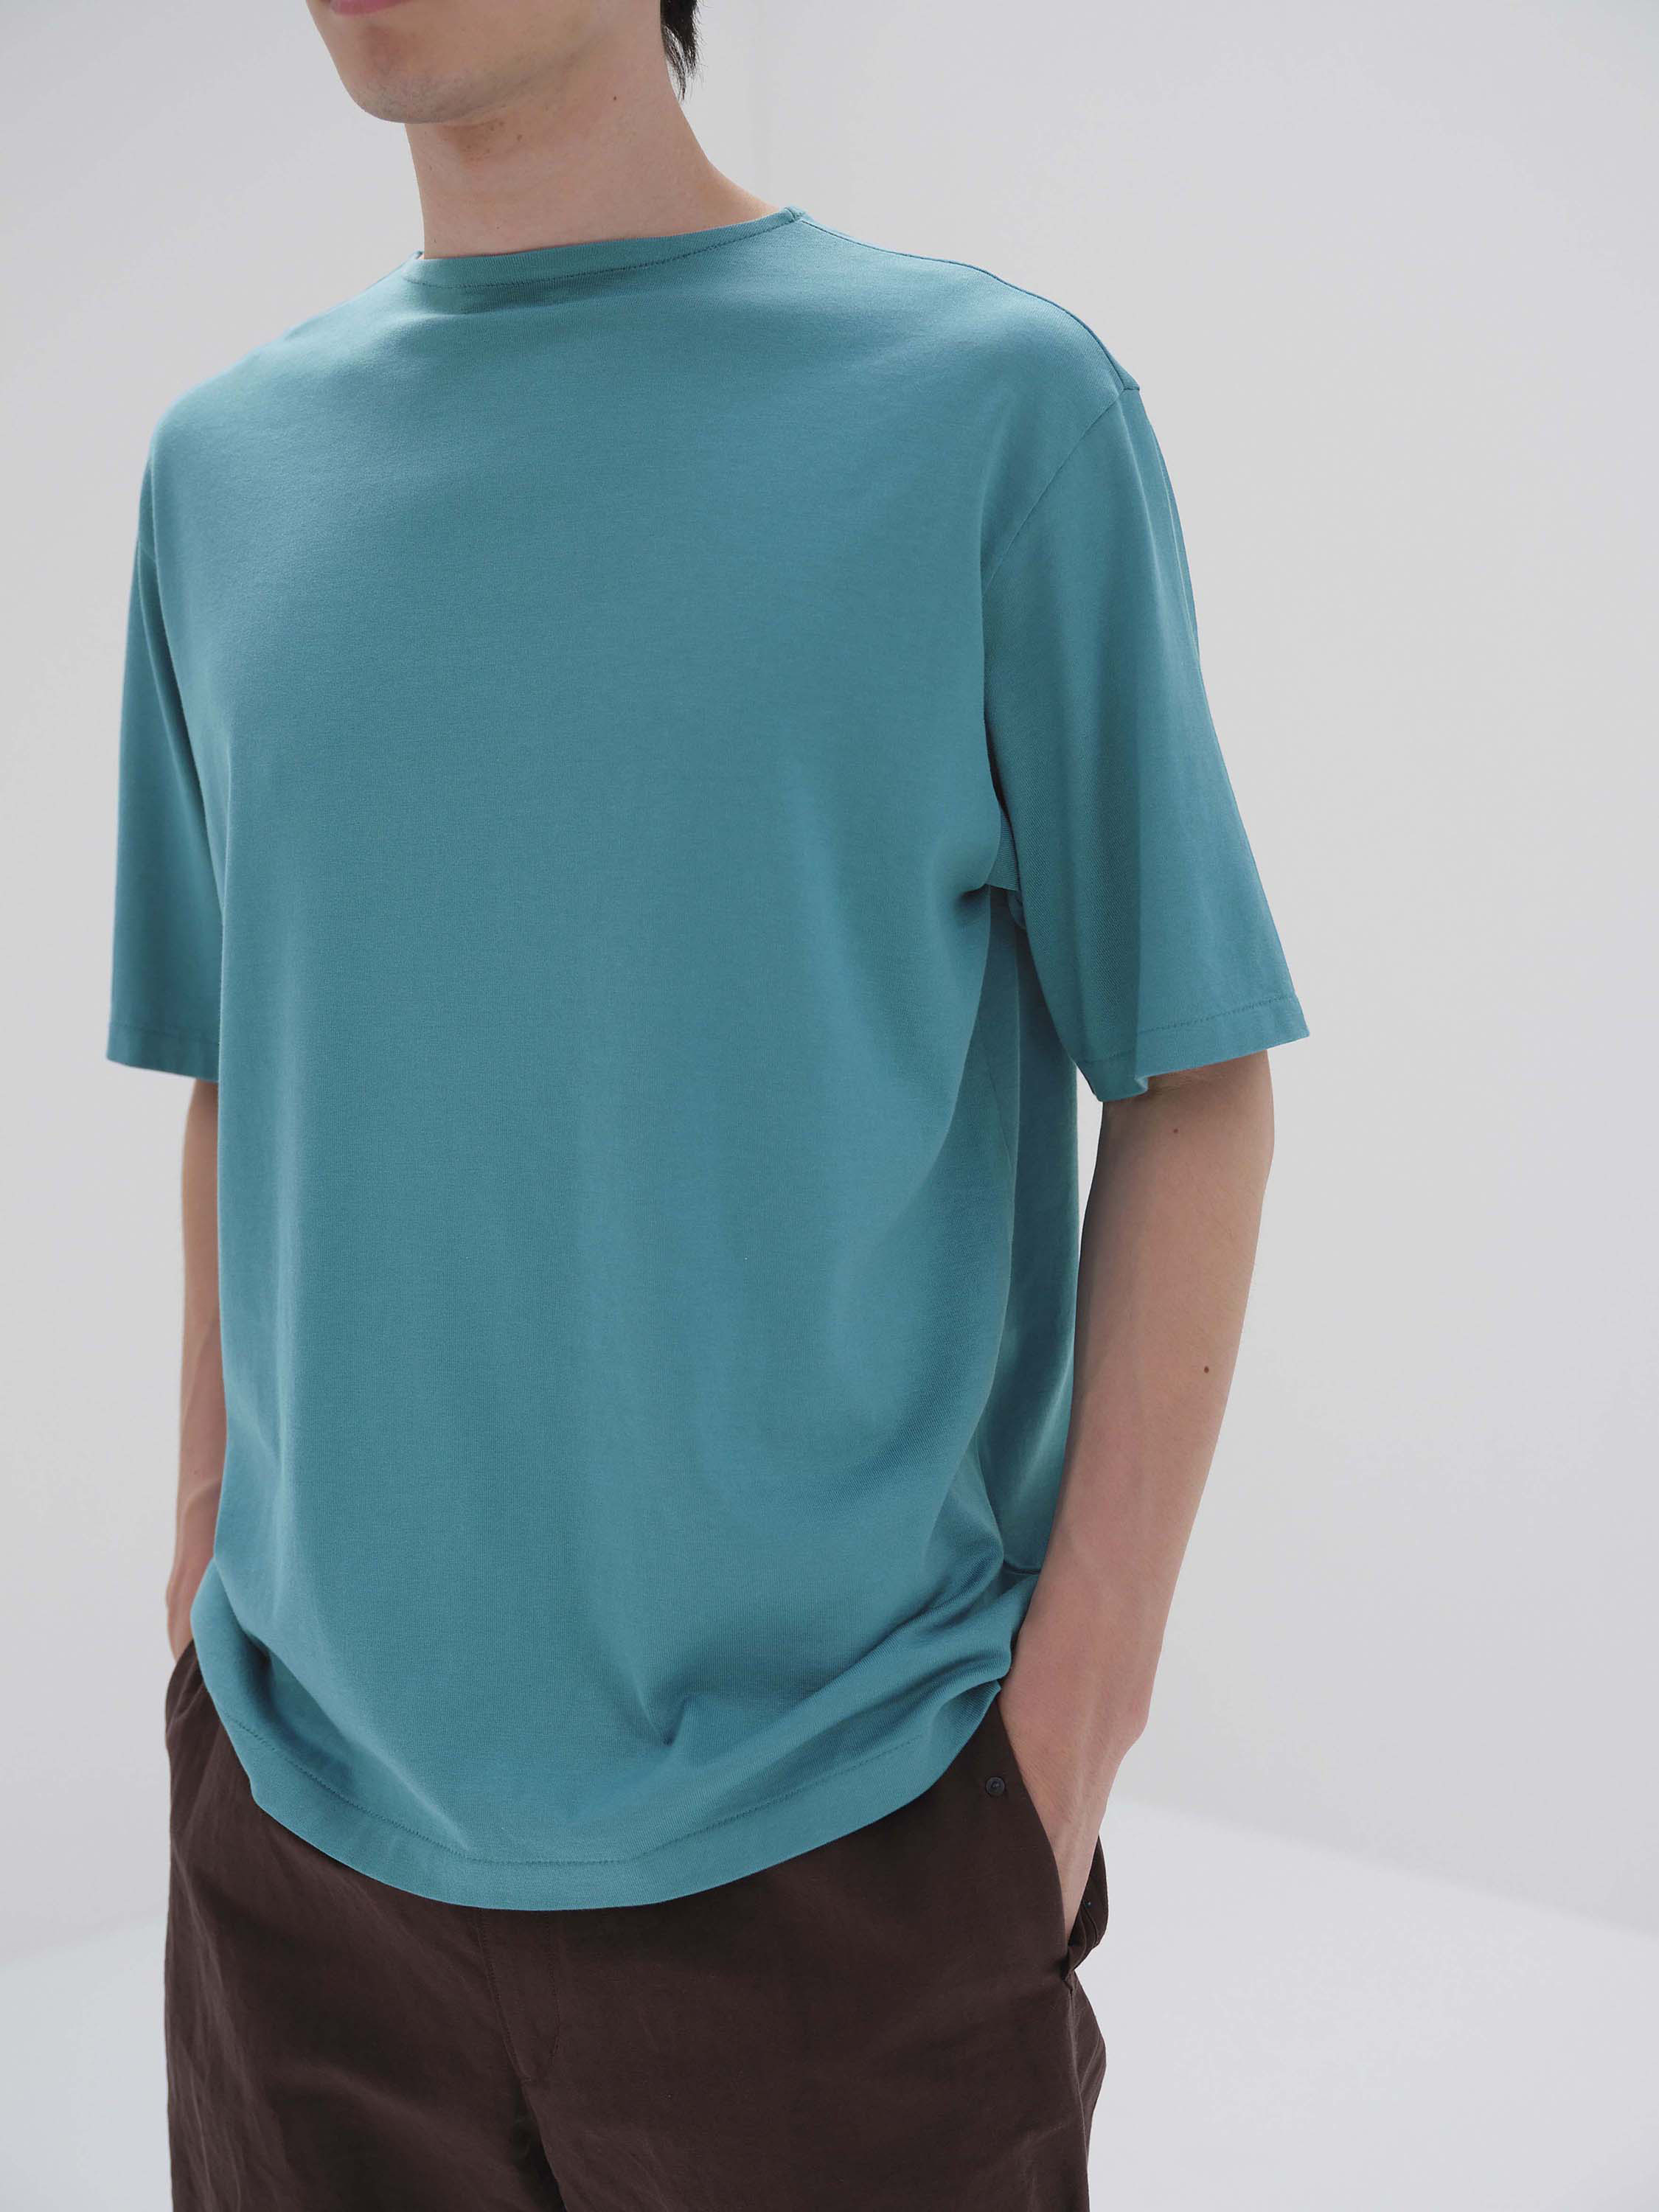 LUSTER PLAITING NARROW BOAT NECK TEE 詳細画像 TEAL GREEN 1